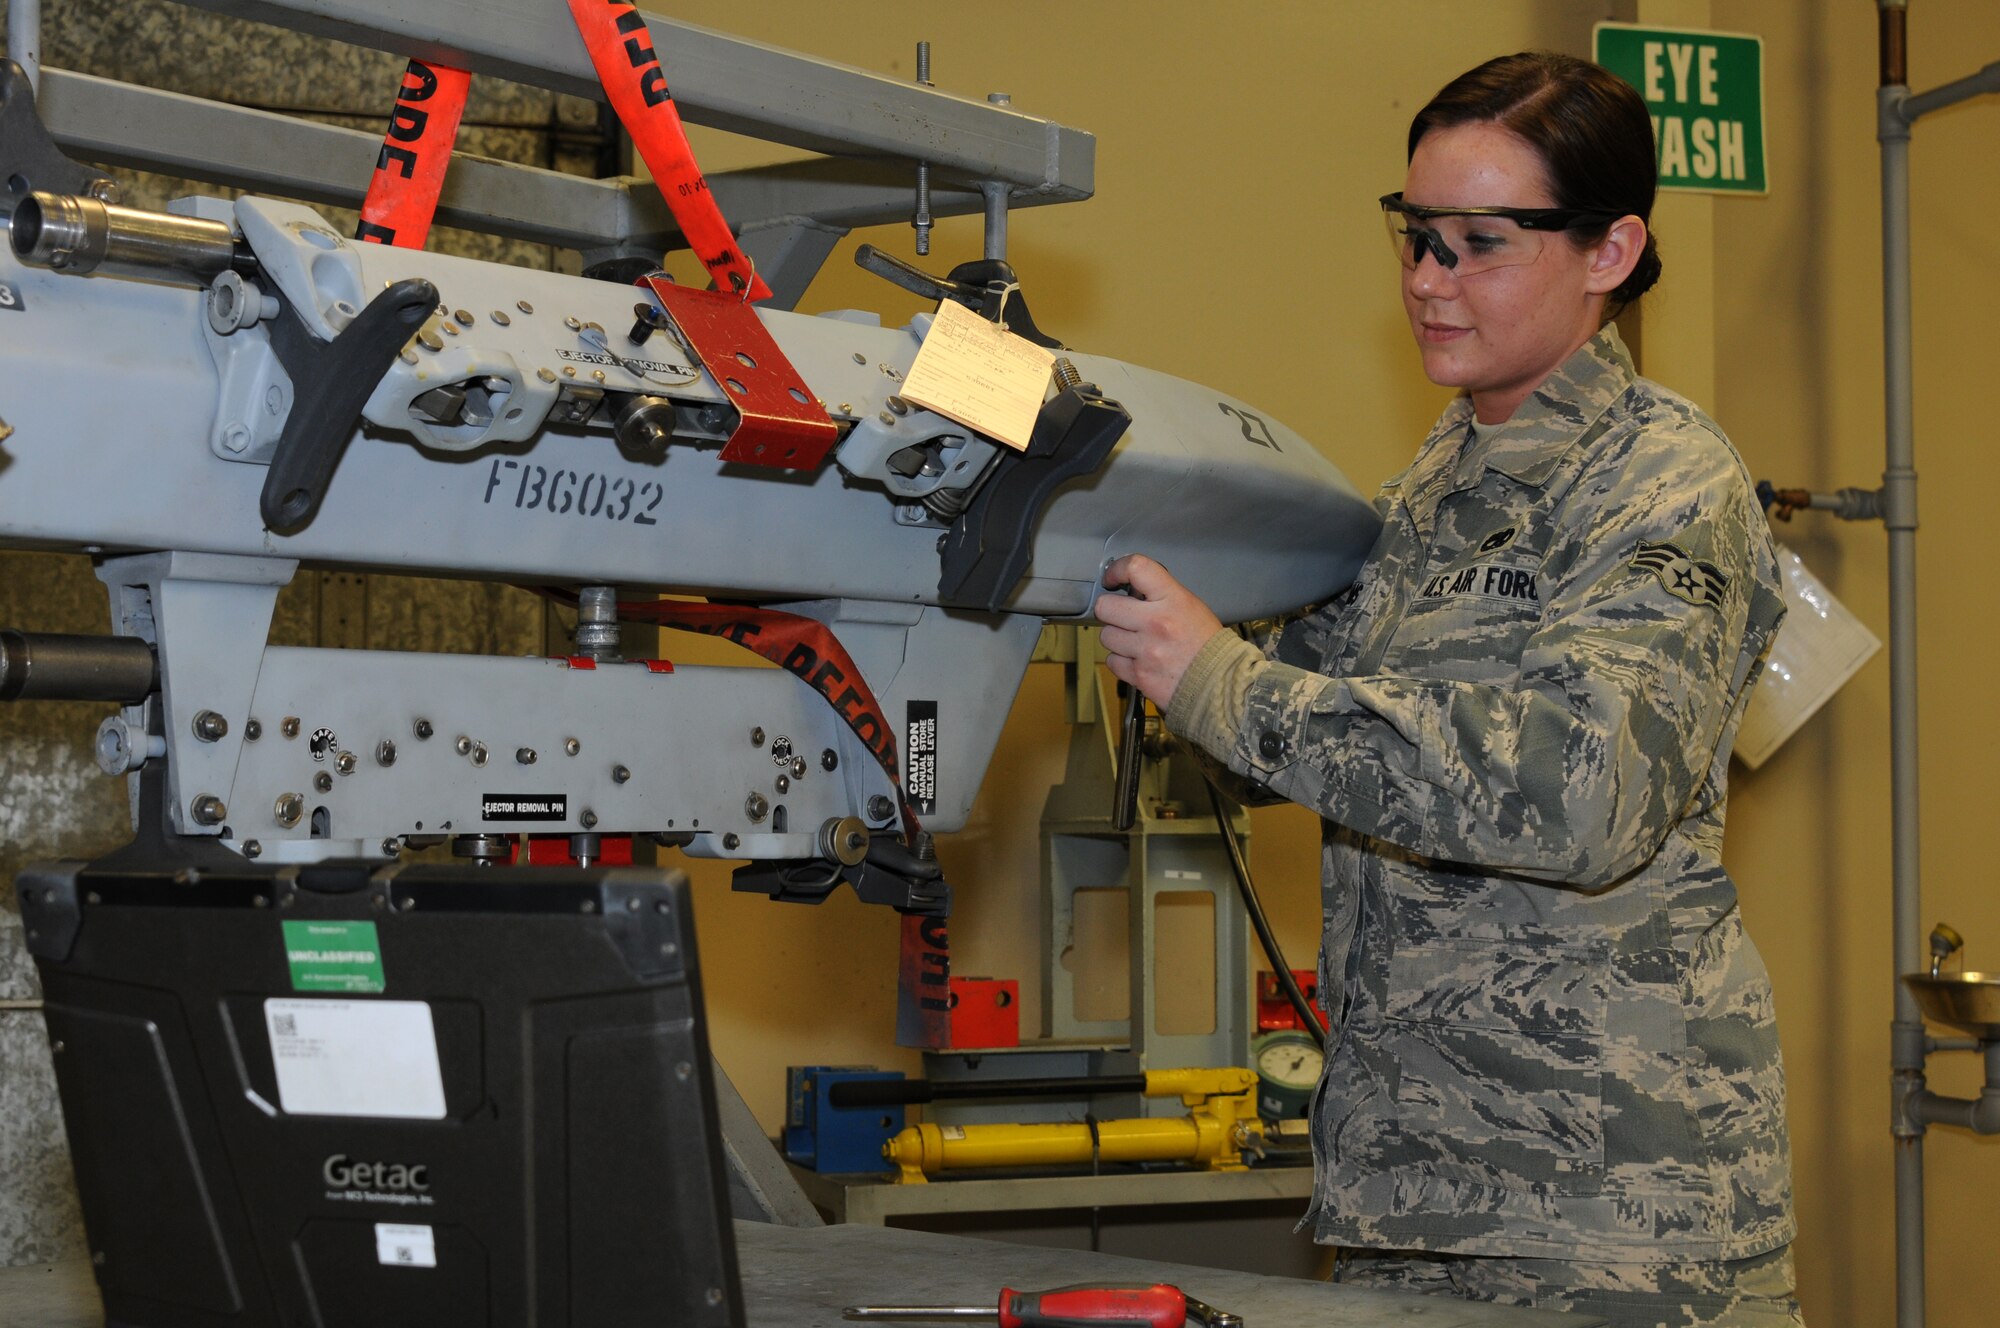 Senior Airman Aimee Adams with the 188th Aircraft Maintenance Squadron works on the triple ejector rack (TER-9A) at Ebbing Air National Guard Base, Fort Smith, Ark., March 2, 2014. Adams was named The Flying Razorback Spotlight for April 2014. The TER-9A is designed to carry three 500-pound bombs. (U.S. Air National Guard photo by Airman 1st Class Cody Martin/released)